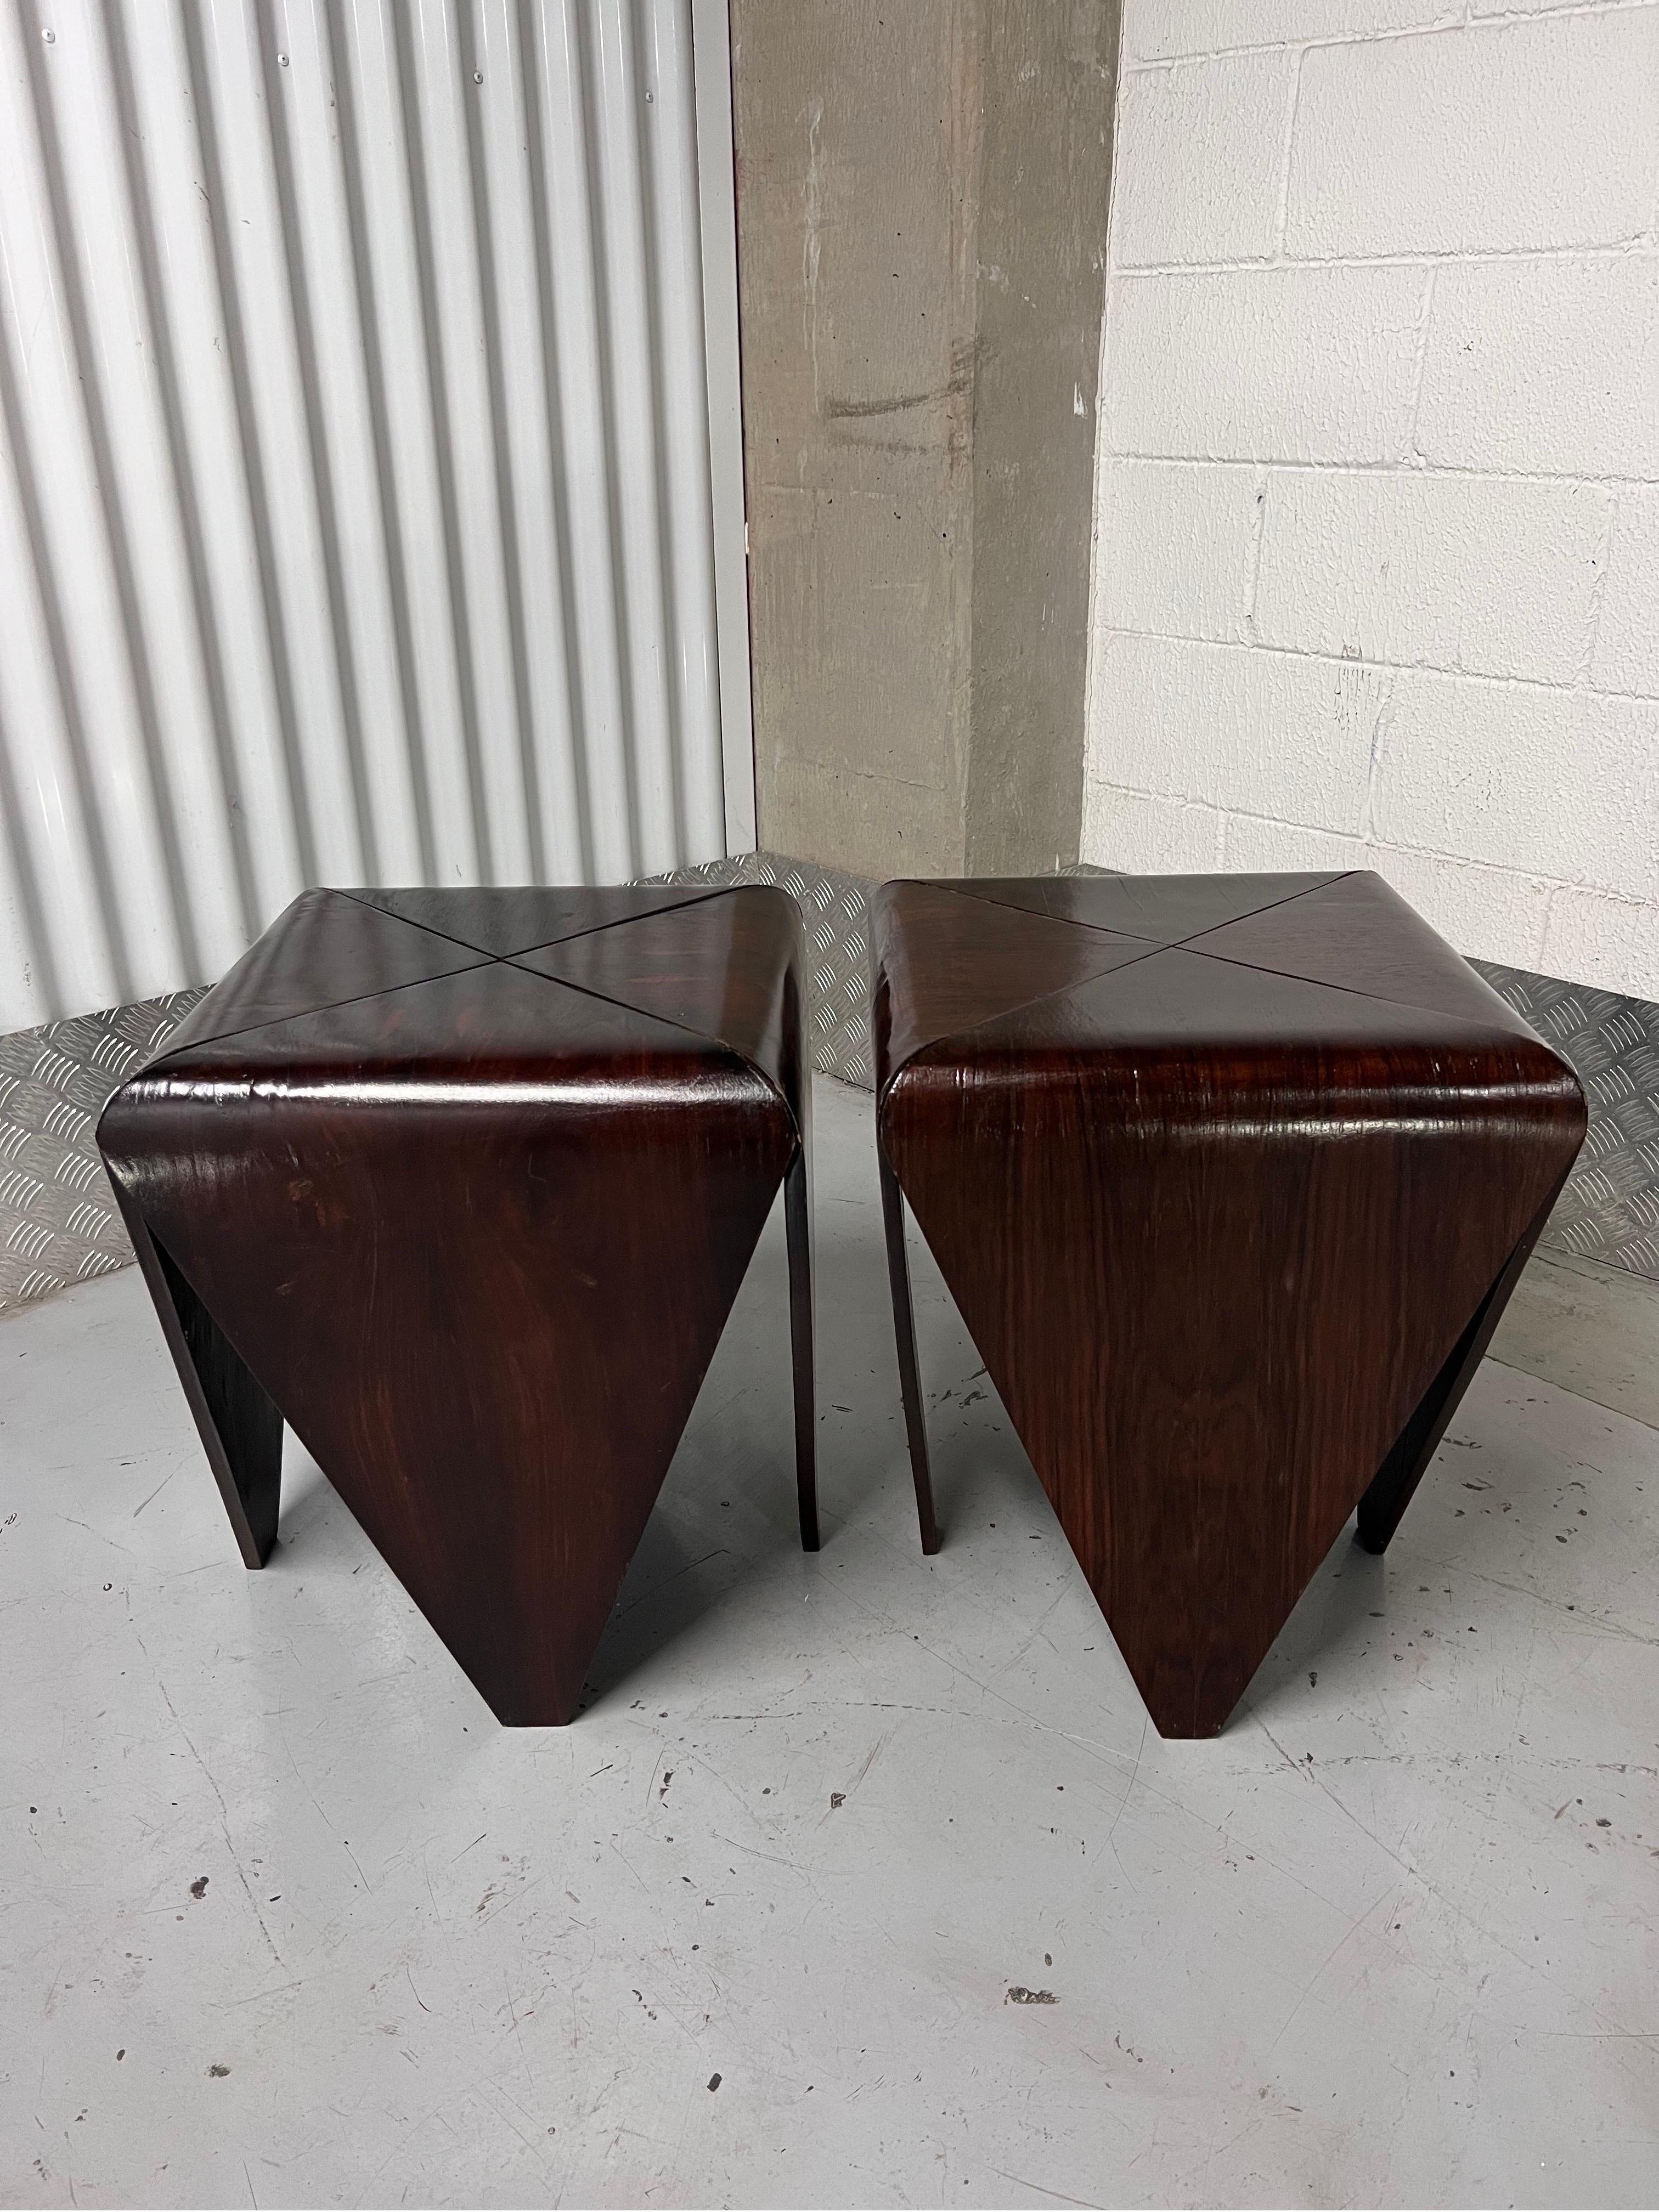 Original pair of 1960s Petalas side tables made of Jacaranda by Brazilian designer Jorge Zalszupin. Each table maintains a L'Atelier label, the manufacturing company owned by Jorge Zalszupin.

The tables are formed by four separate petals of